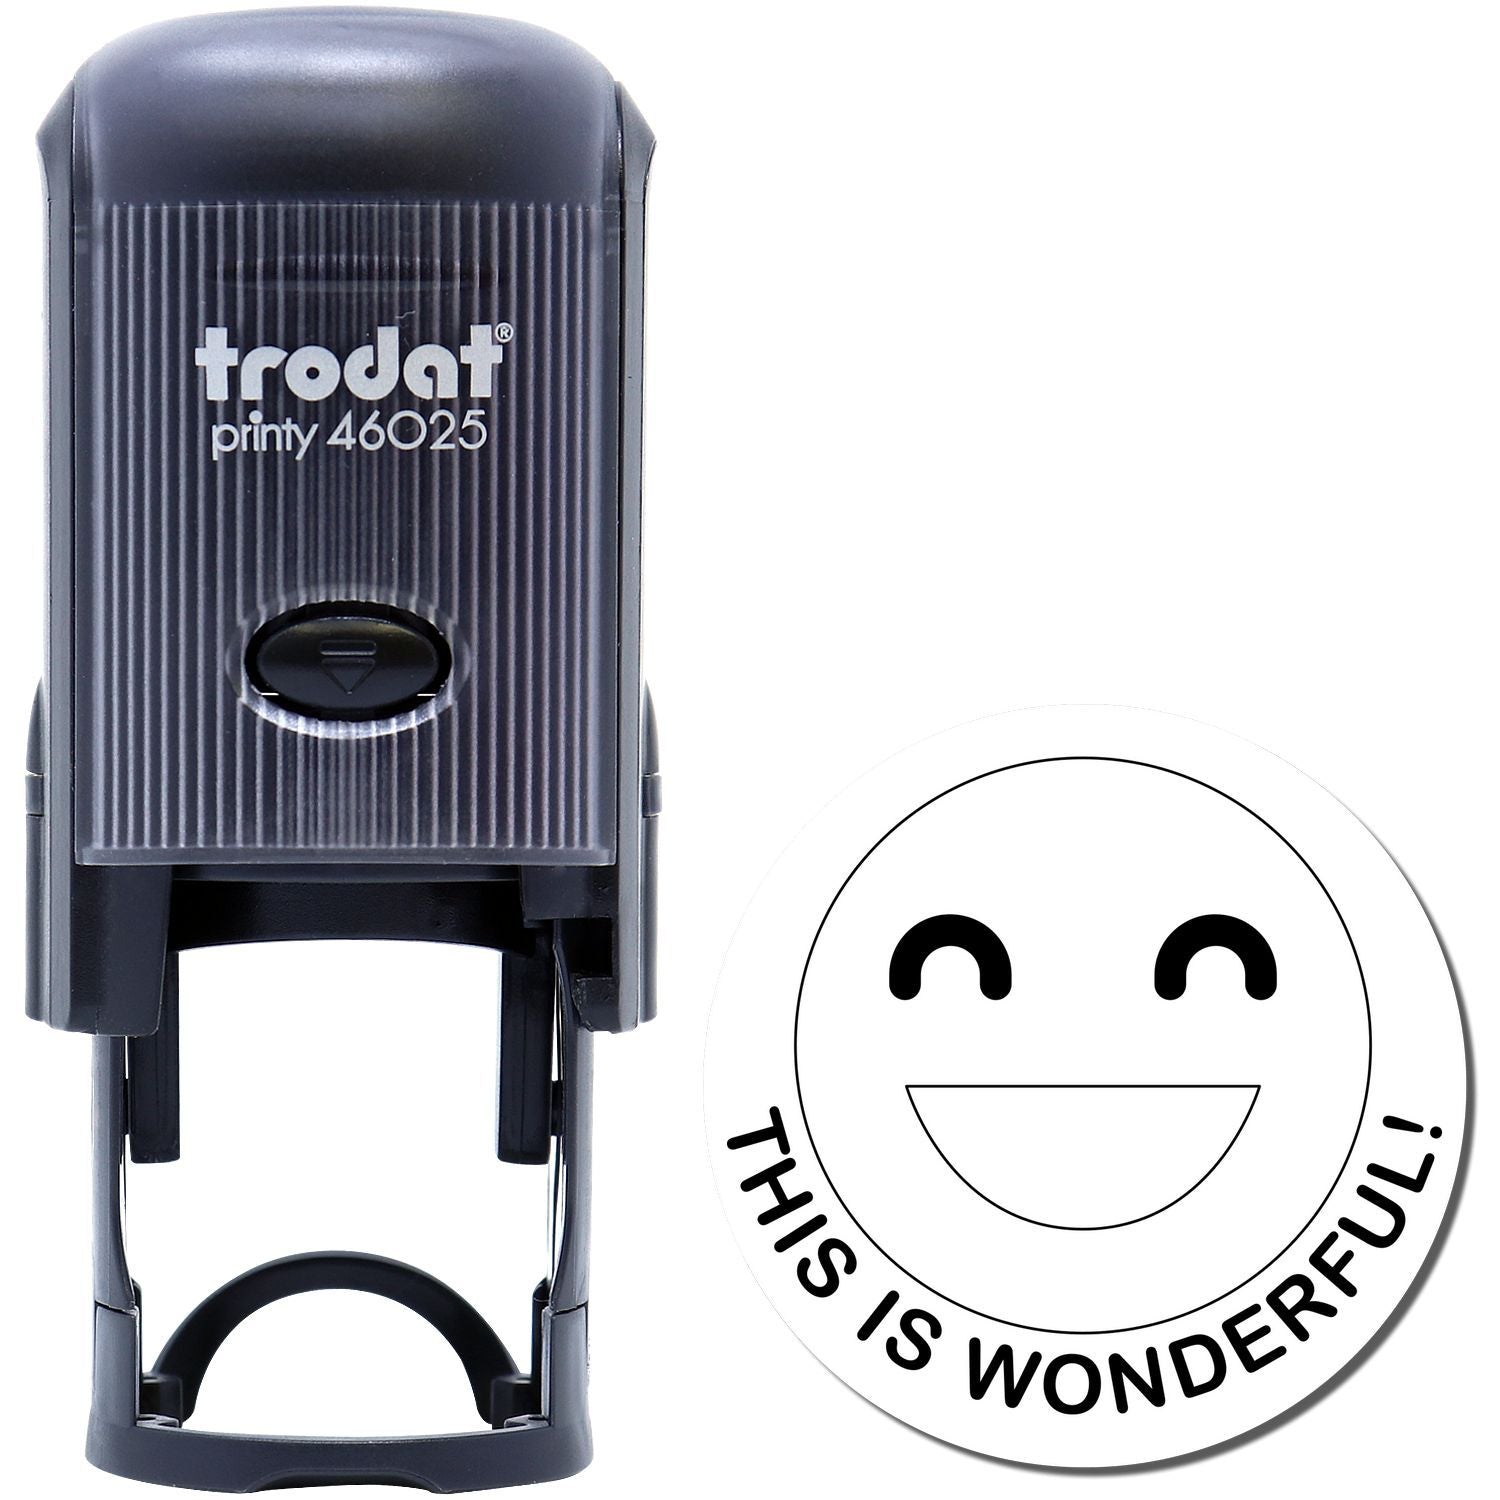 A Round This is Wonderful Smiley Self-Inking Stamp with a stamped image showing how the text "THIS IS WONDERFUL!" with a smiley will display after stamping.